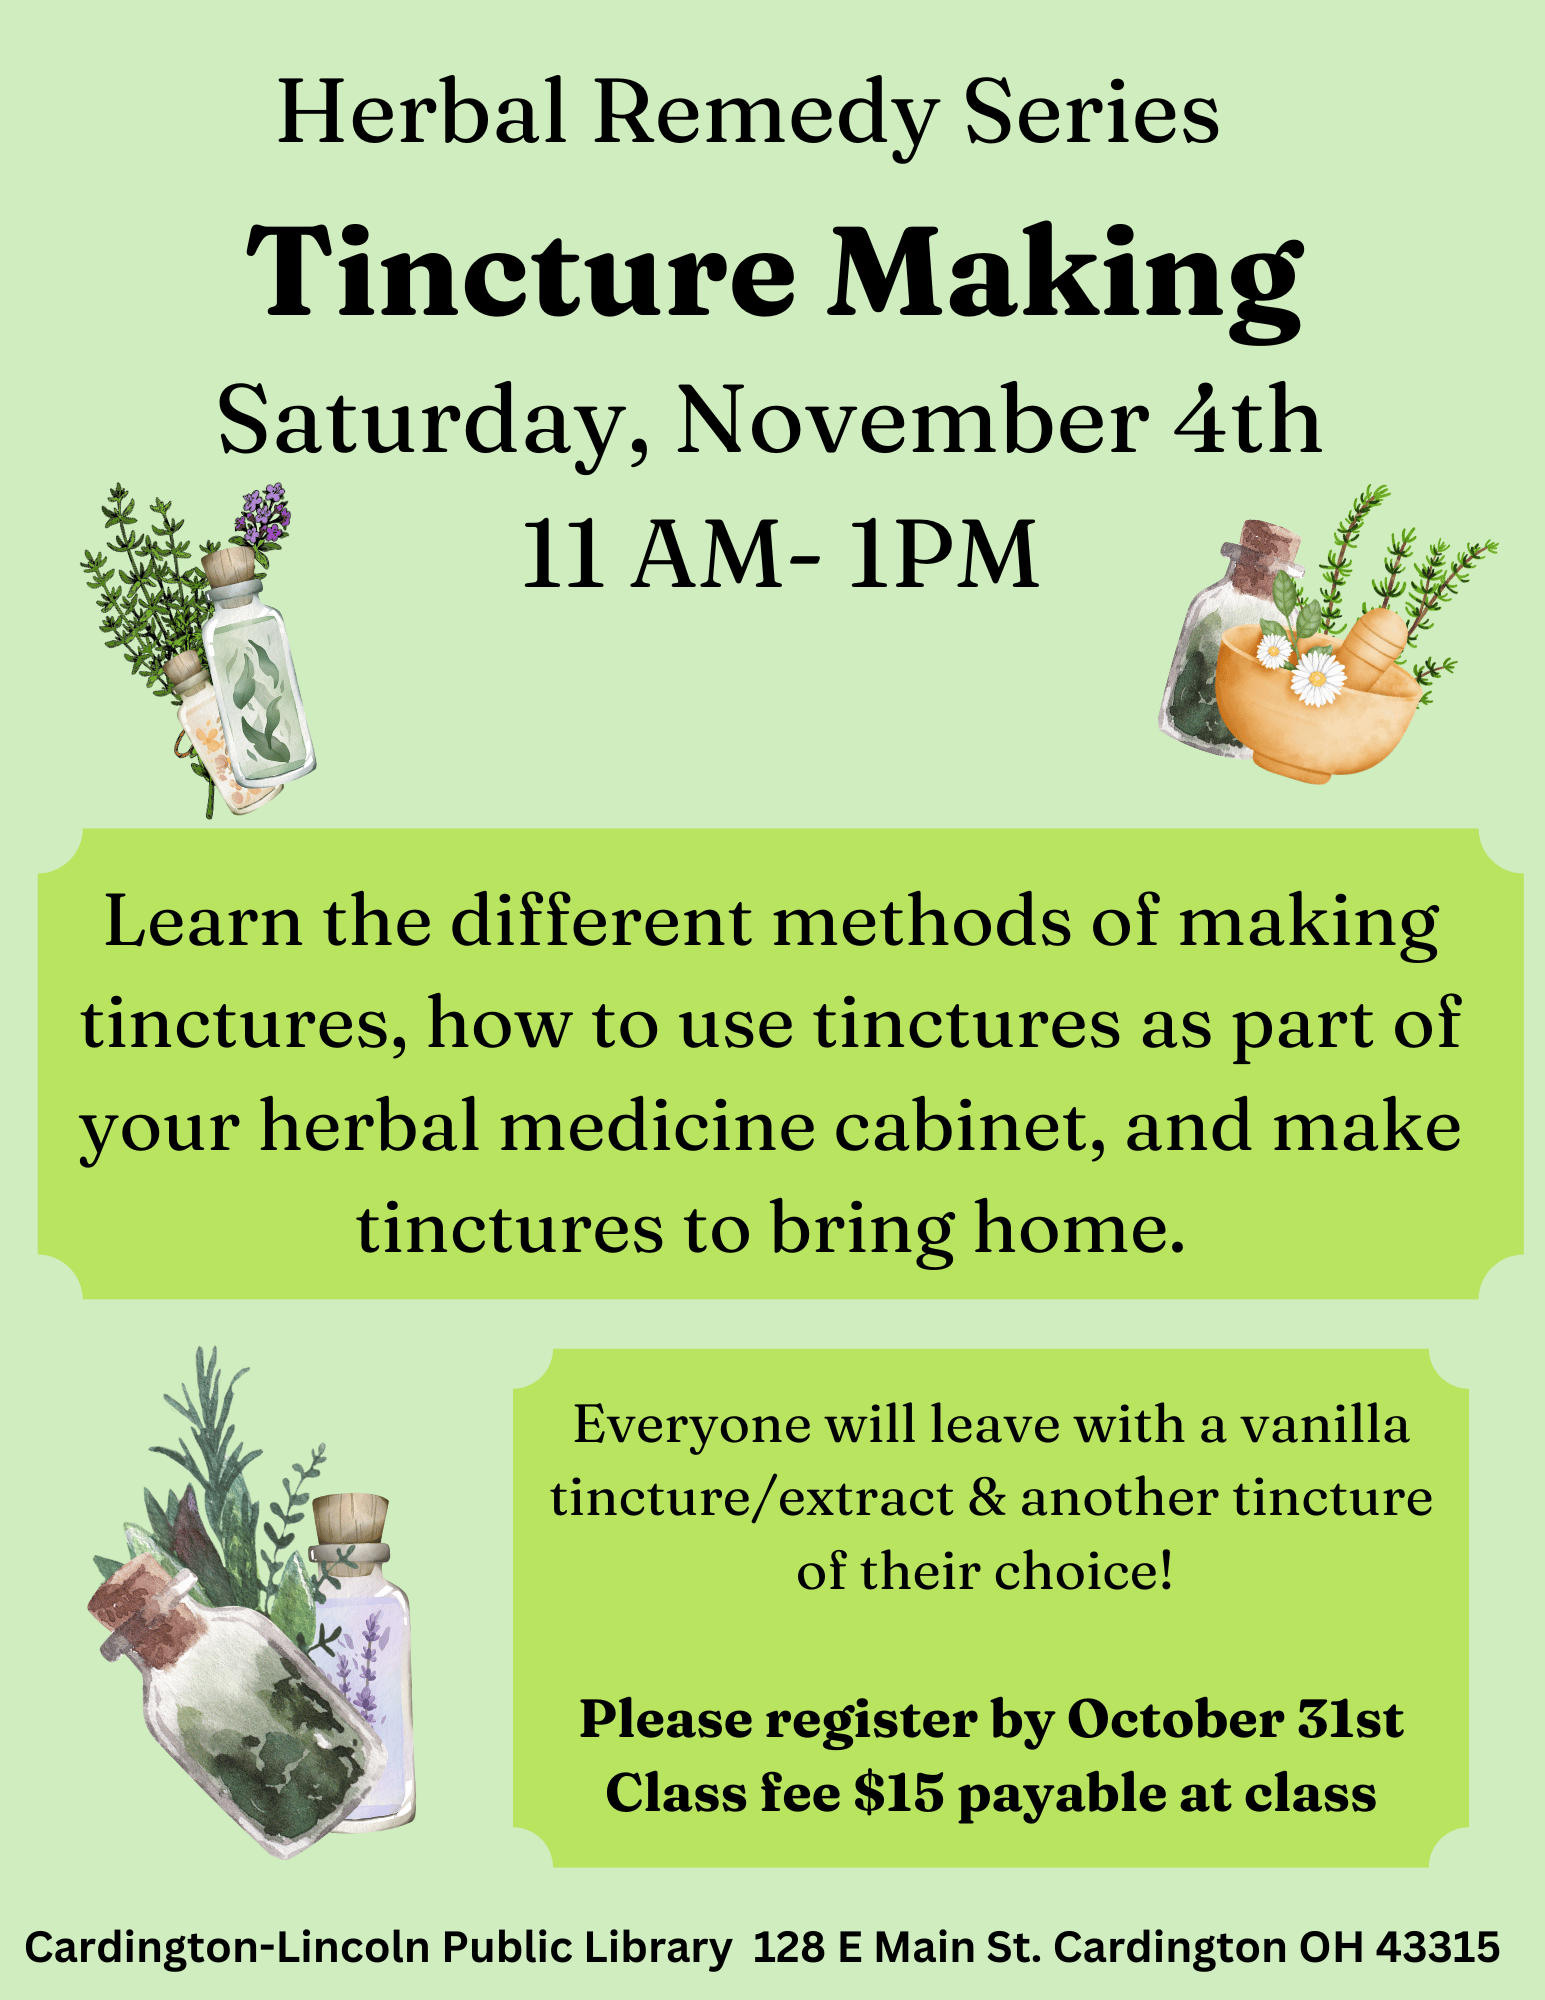 Learn the different methods of making tinctures, how to use tinctures as part of your herbal medicine cabinet, and make tinctures to bring home.